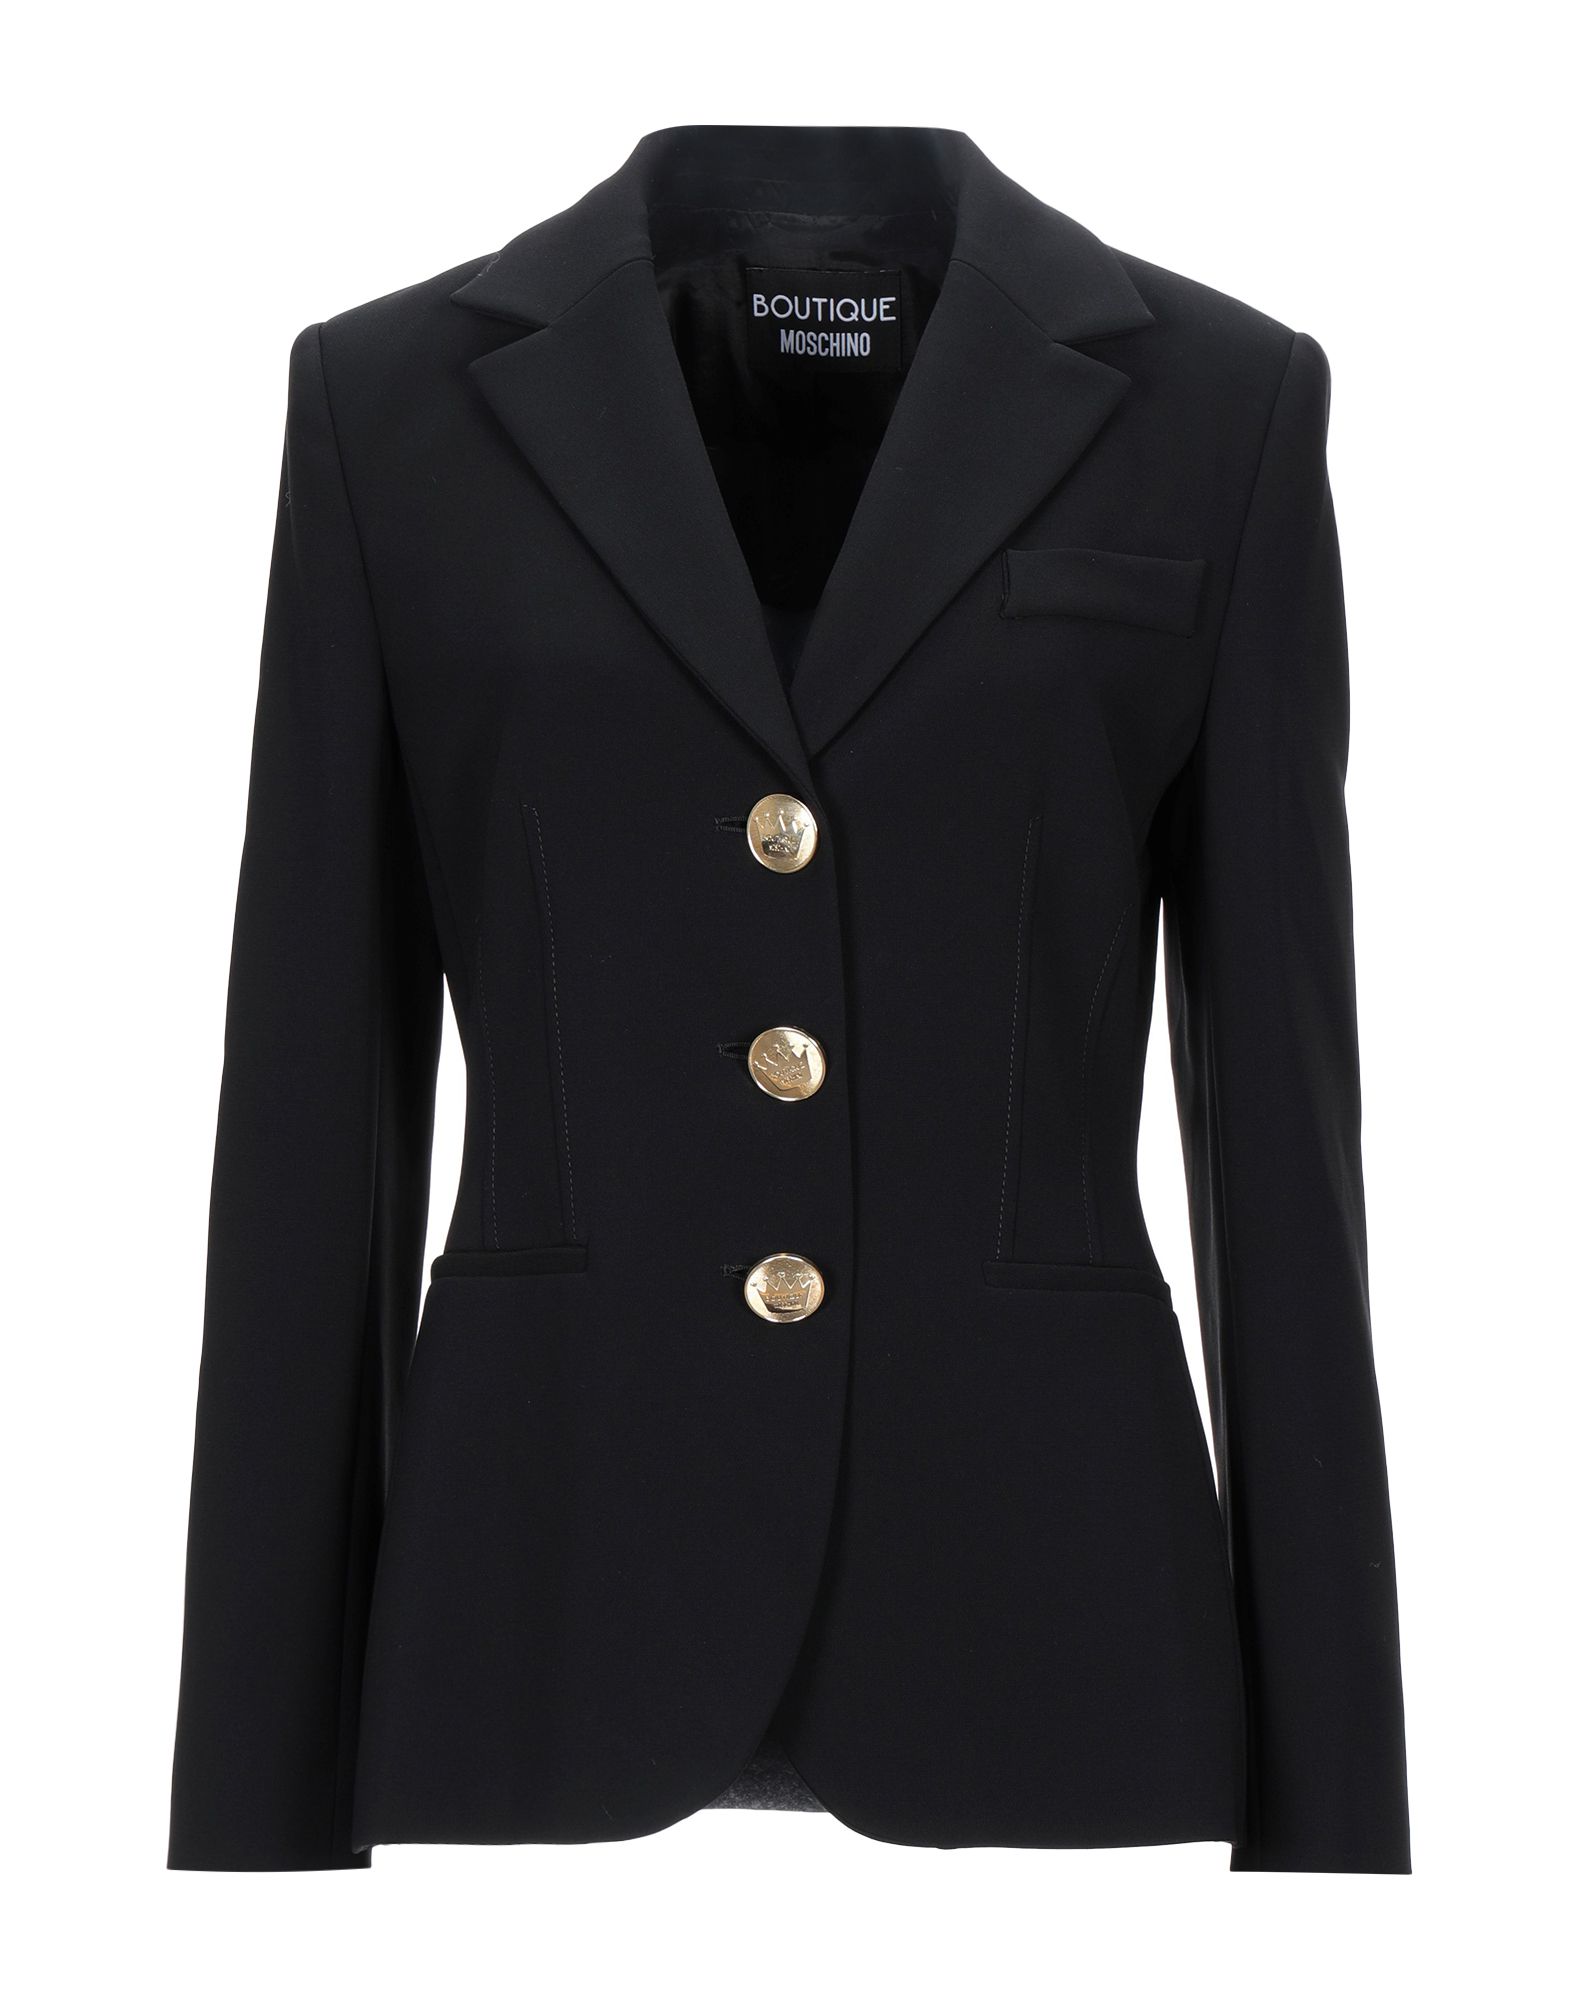 BOUTIQUE MOSCHINO Suit jackets - Item 49575616